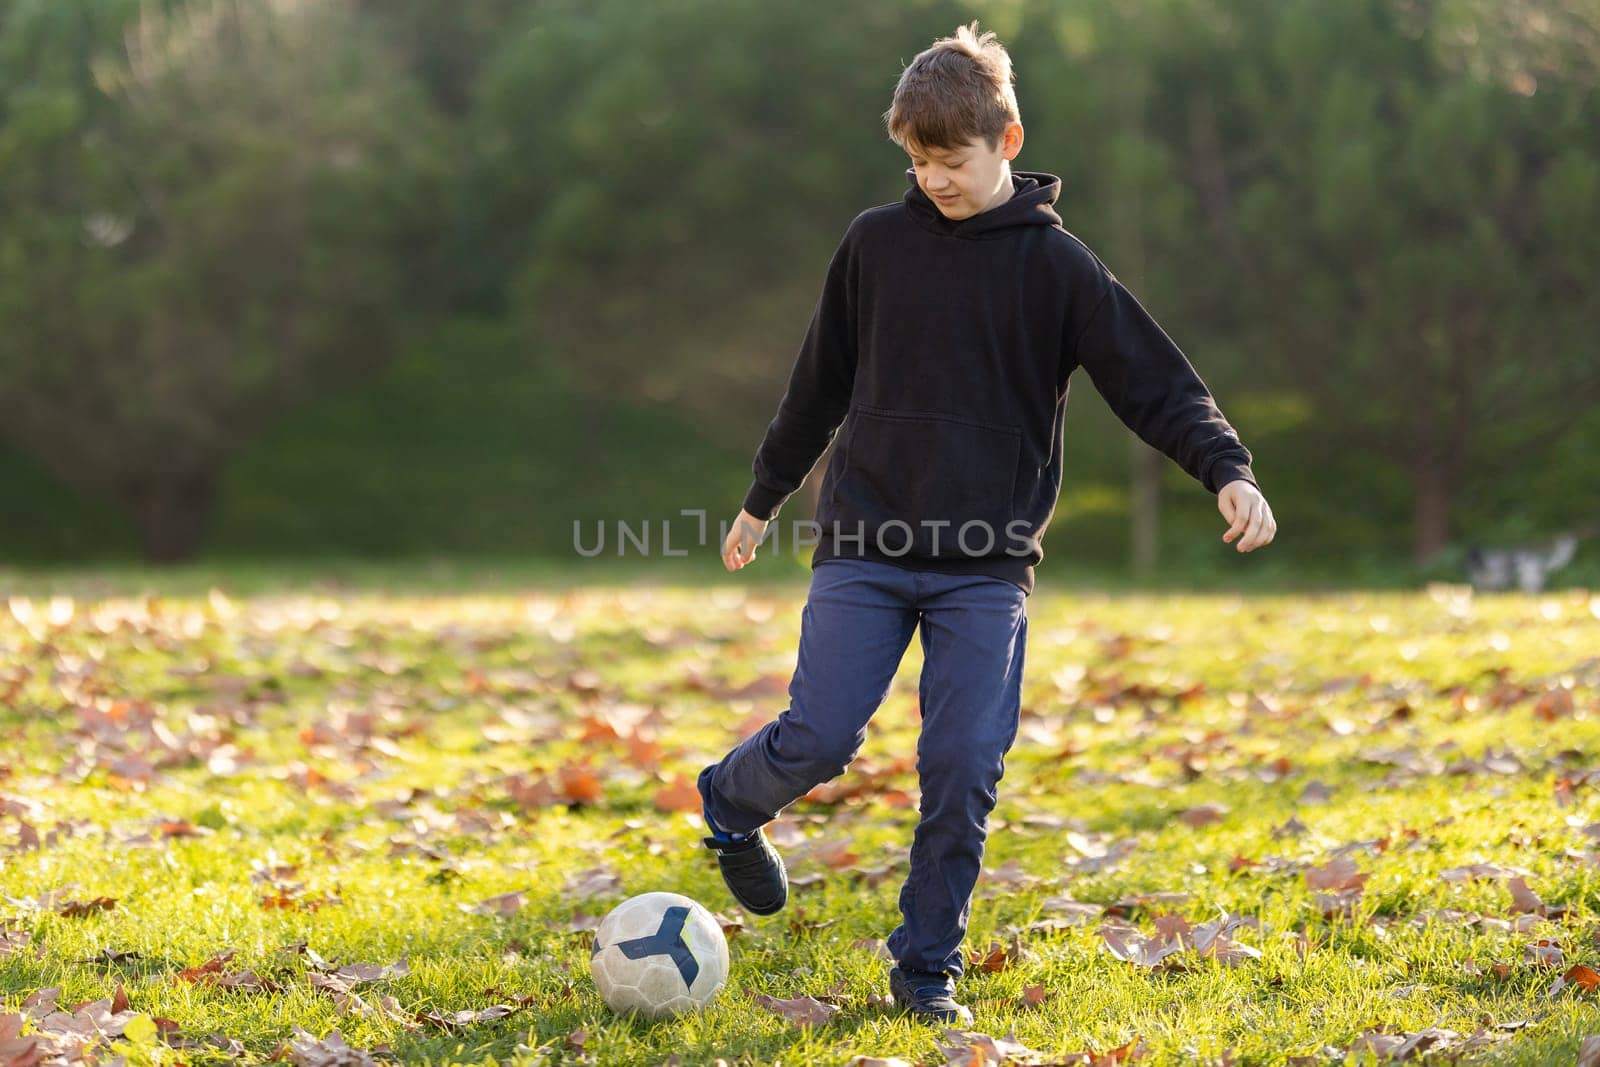 A boy kicks a soccer ball in a park. The boy is wearing a black hoodie and blue jeans